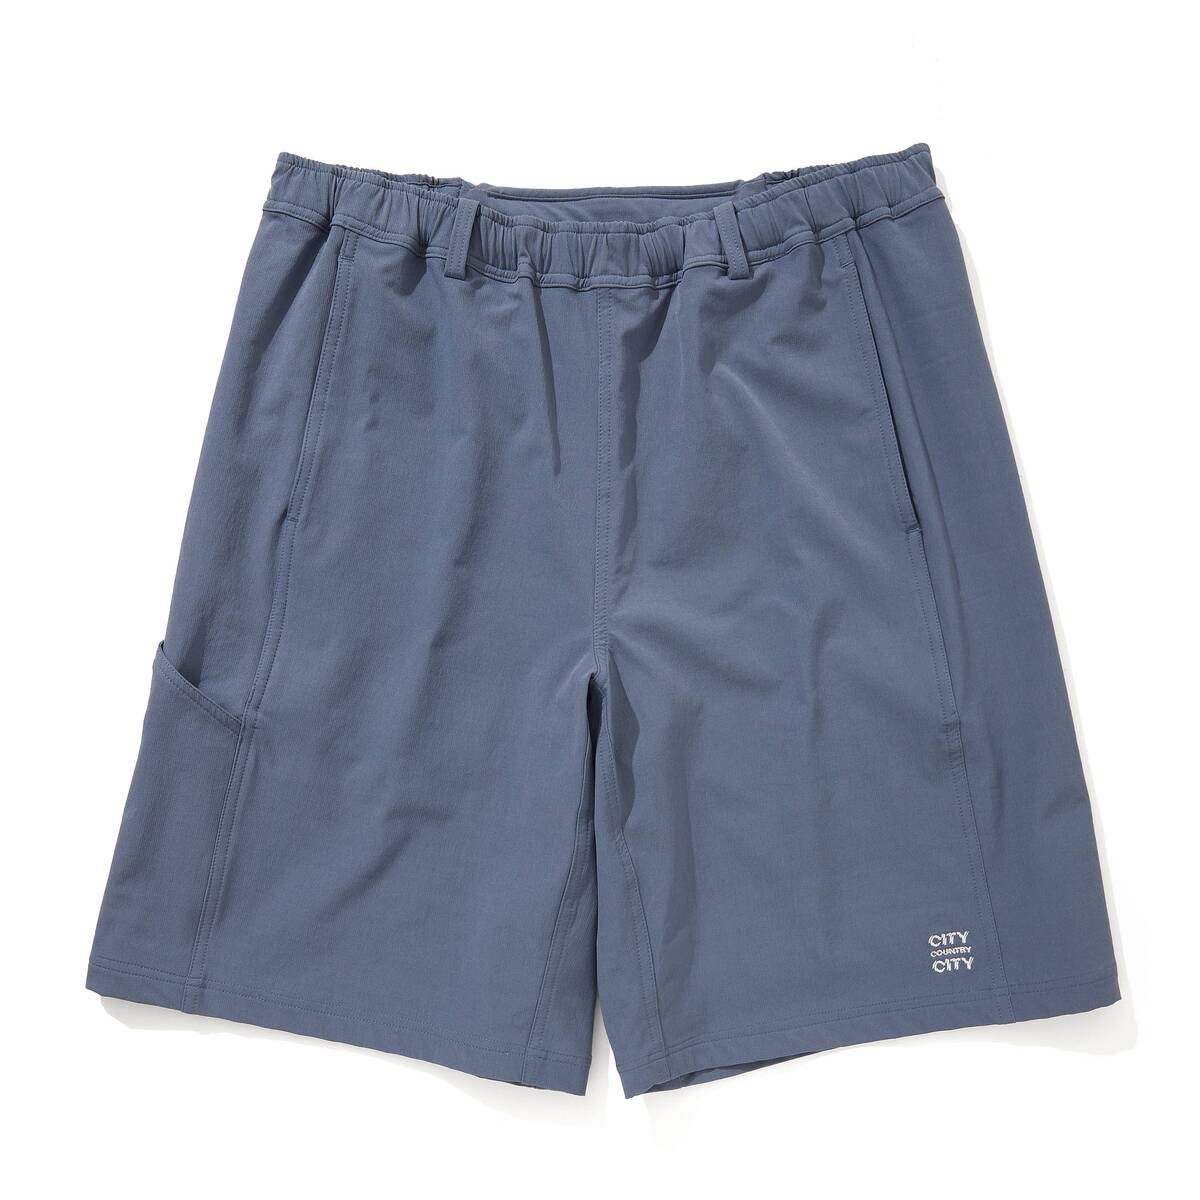 CITY COUNTRY CITY Stretch Easy Short Pants -deep blue 1